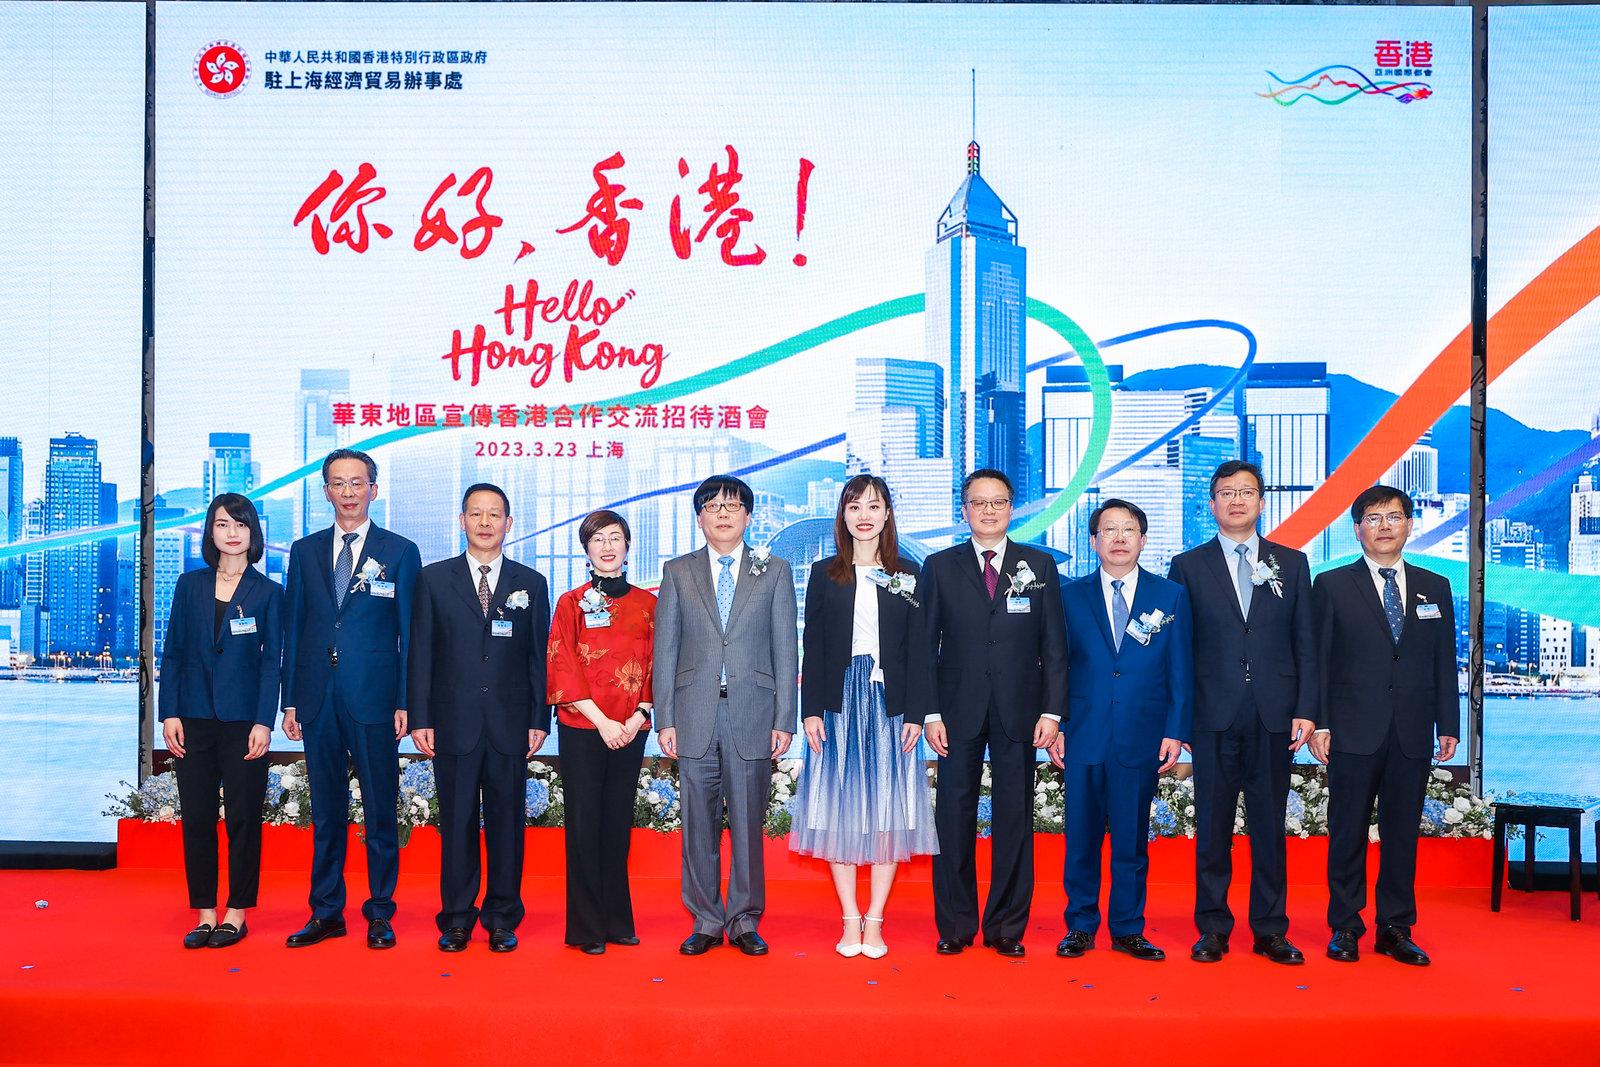 The Hong Kong Economic and Trade Office in Shanghai (SHETO) held a "Hello, Hong Kong!" East China Region Reception in Shanghai today (March 23). Photo shows (from left) Deputy Director of the SHETO Ms Tiffany Leung; member of Party Group of Foreign Affairs Office of Jiangsu Provincial People's Government and Vice Chairman of Jiangsu People's Association for Friendship with Foreign Countries Mr Qian Wenhua; Deputy Director of the Department of Hong Kong and Macao Affairs of the People's Government of Zhejiang Province Mr Yao Guowen; the Director of the SHETO, Mrs Laura Aron; Deputy Secretary-General of Shanghai Municipal People's Government Mr Gu Honghui; the Under Secretary for Innovation, Technology and Industry, Ms Lillian Cheong; the Chair of the Administrative Office of the Committee for Liaison with Hong Kong, Macao, Taiwan and Overseas Chinese of the CPPCC Shanghai Committee, Mr Yao Hai; the Director General of the Taiwan, Hong Kong and Macao Affairs Offices of the Shandong Provincial People's Government, Mr Zhang Liansan; Deputy Director General of the Hong Kong and Macao Affairs Office of the Shanghai Municipal Government Mr Zhou Yajun; and Grand 2 Counselor of the Hong Kong and Macao Affairs Office of the People's Government of Anhui Province Mr Zhao Ming, after officiating at a launching ceremony at the reception.